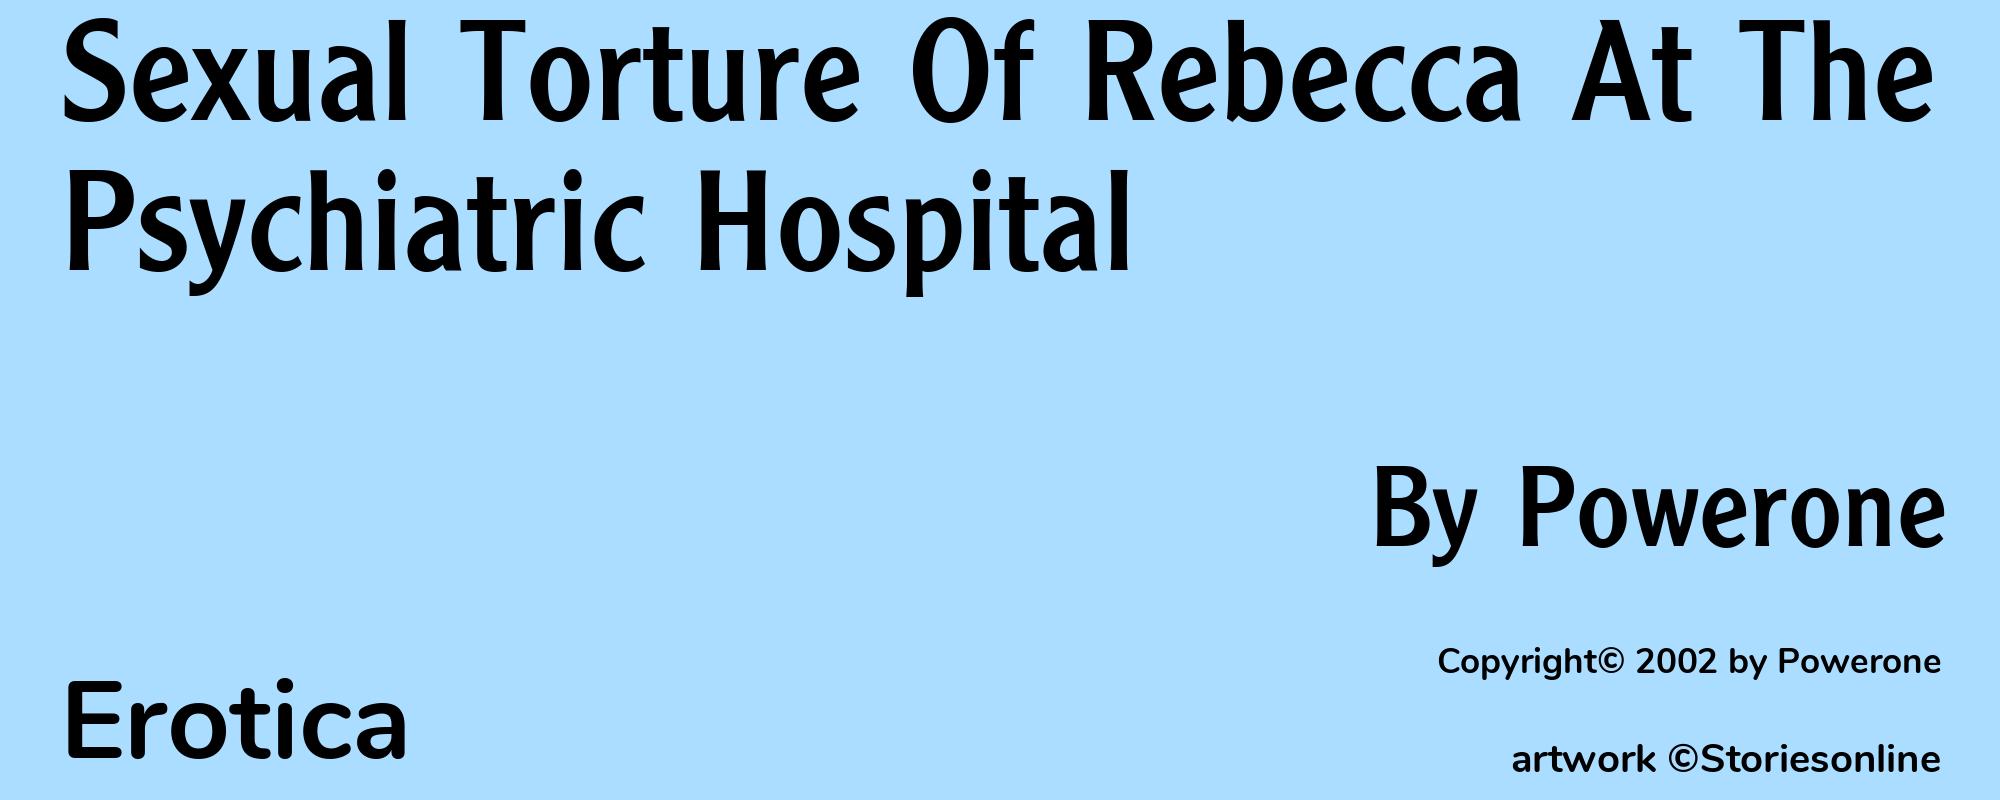 Sexual Torture Of Rebecca At The Psychiatric Hospital - Cover